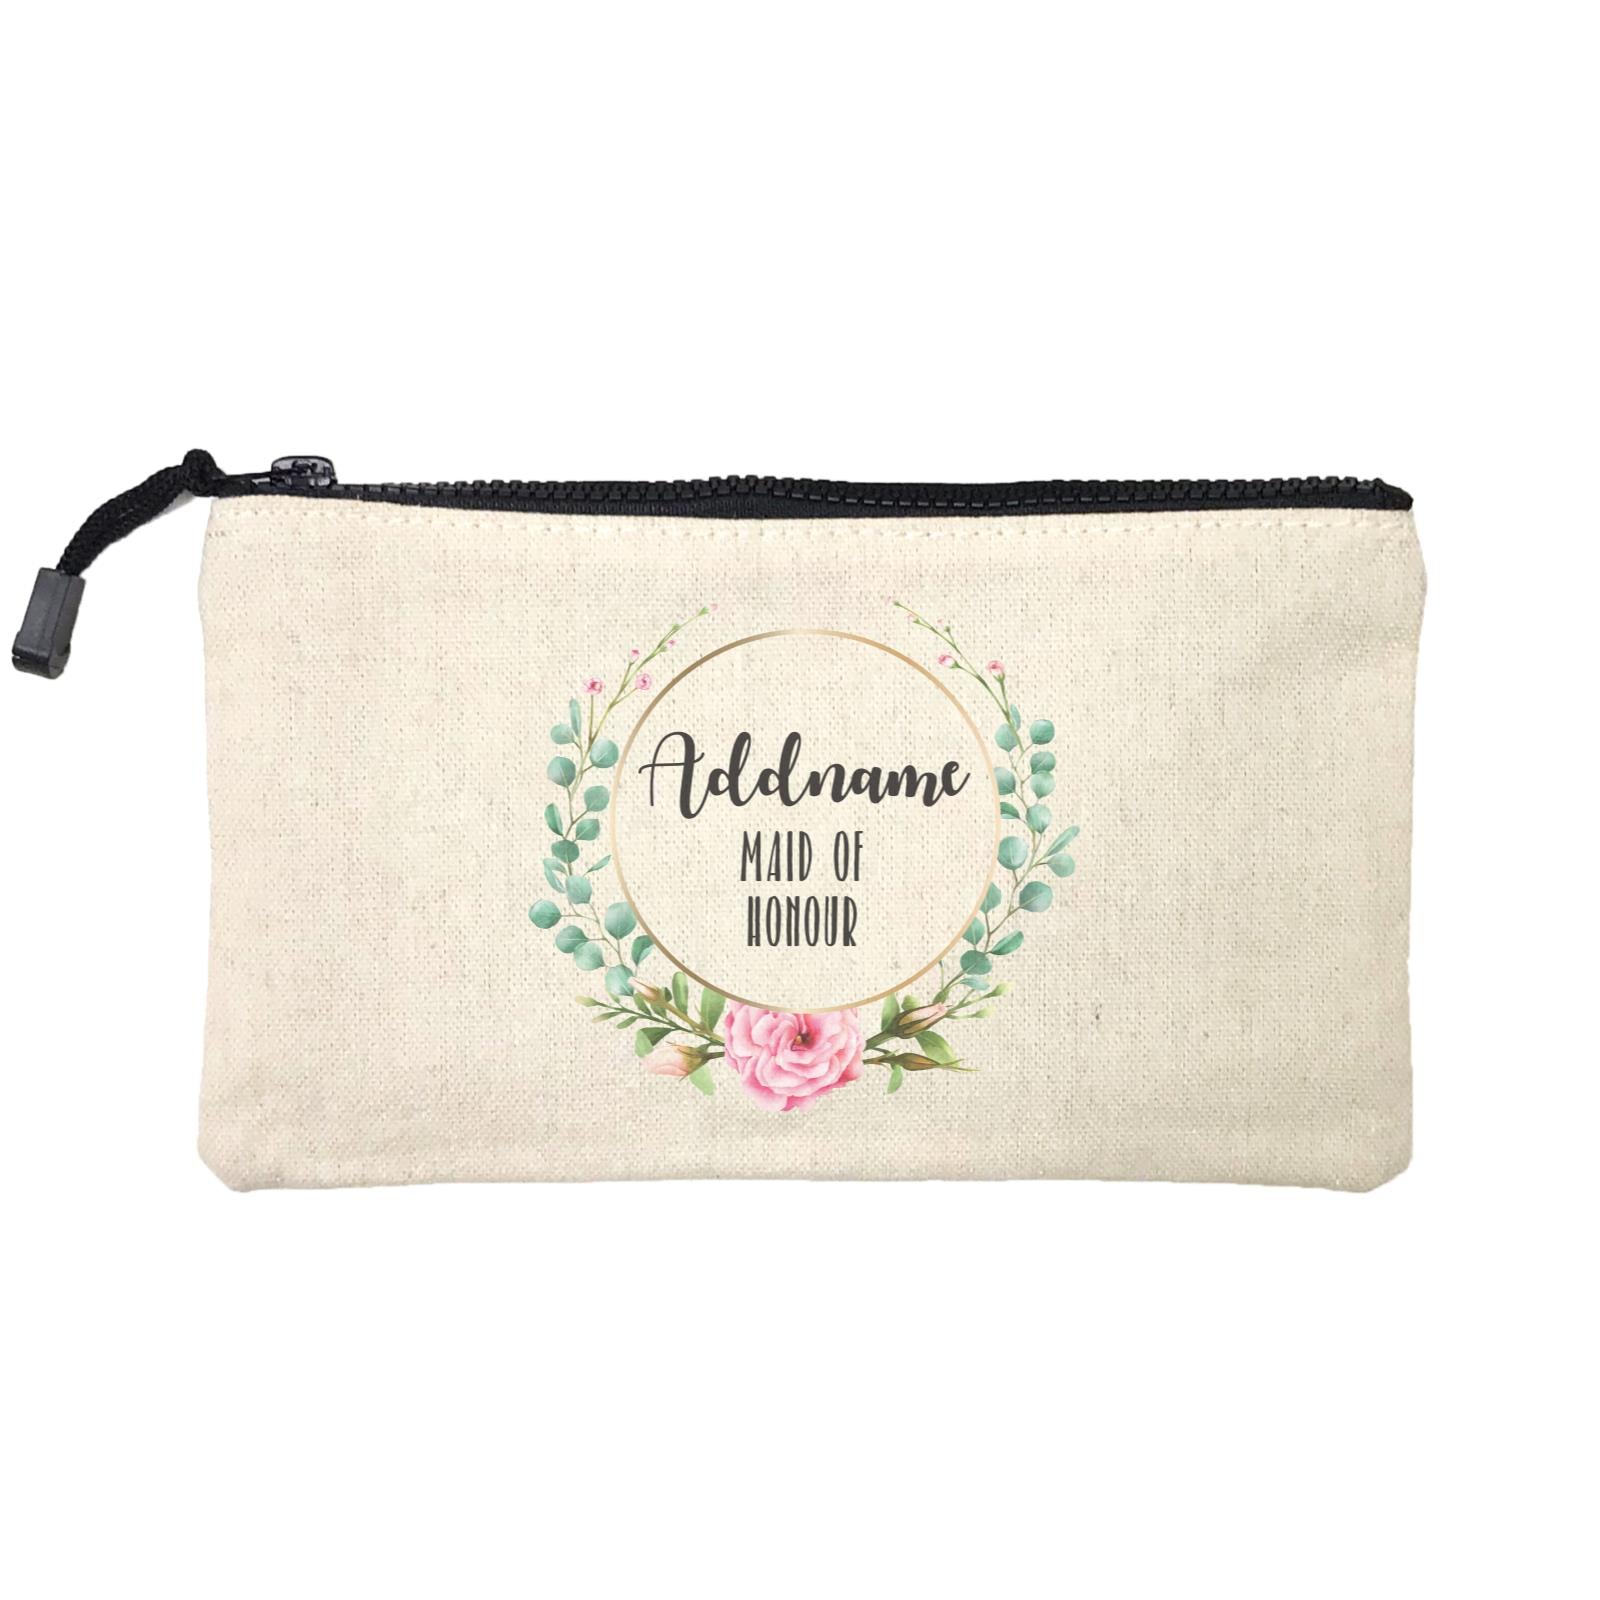 Bridesmaid Floral Modern Pink Flowers With Circle Maid Of Honour Addname Mini Accessories Stationery Pouch